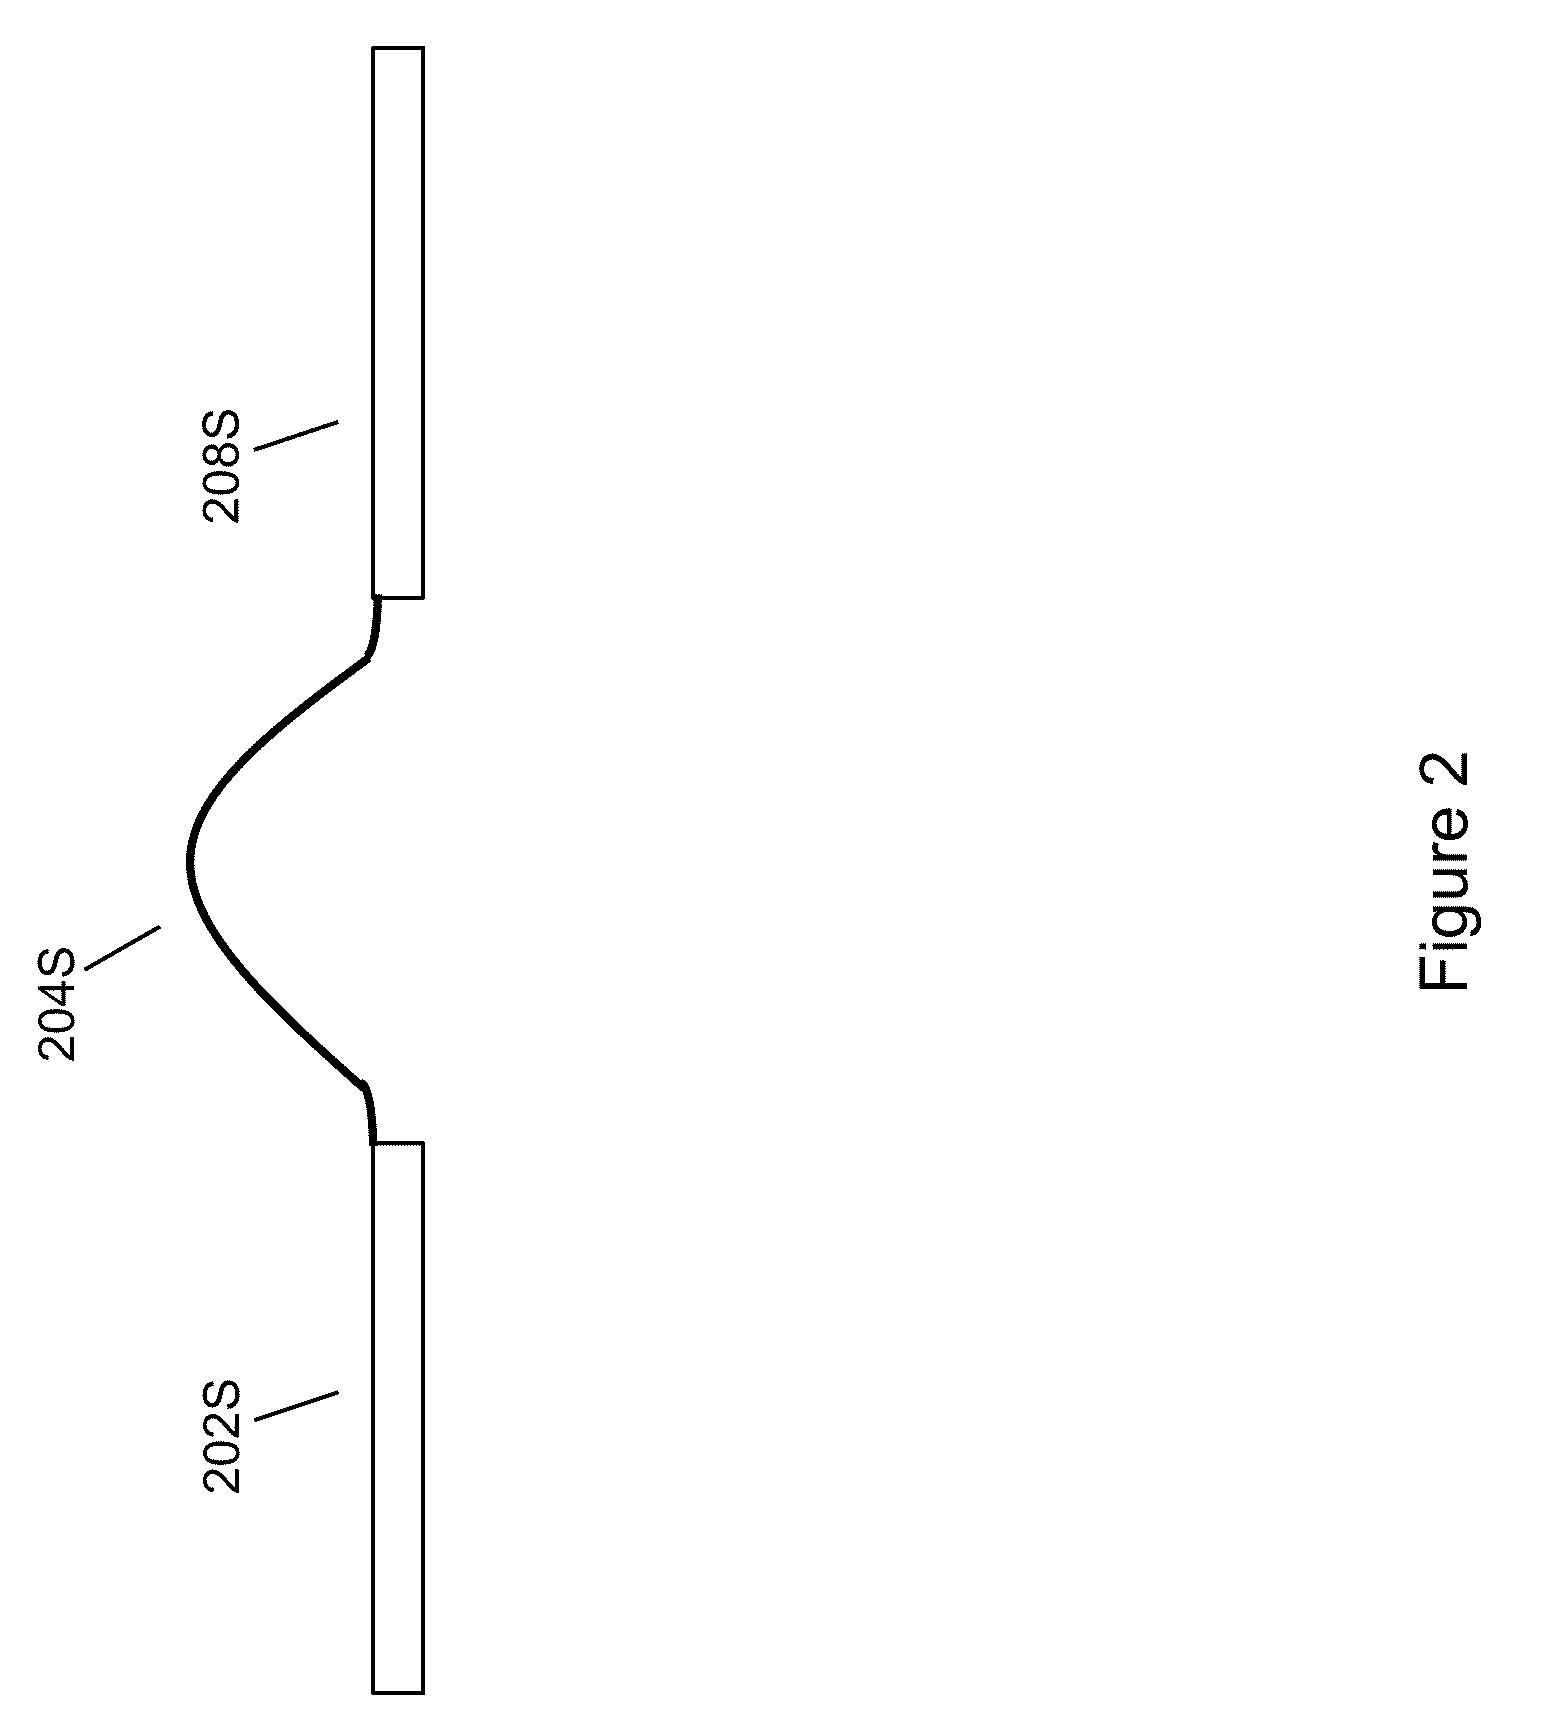 Systems, methods, and devices using stretchable or flexible electronics for medical applications